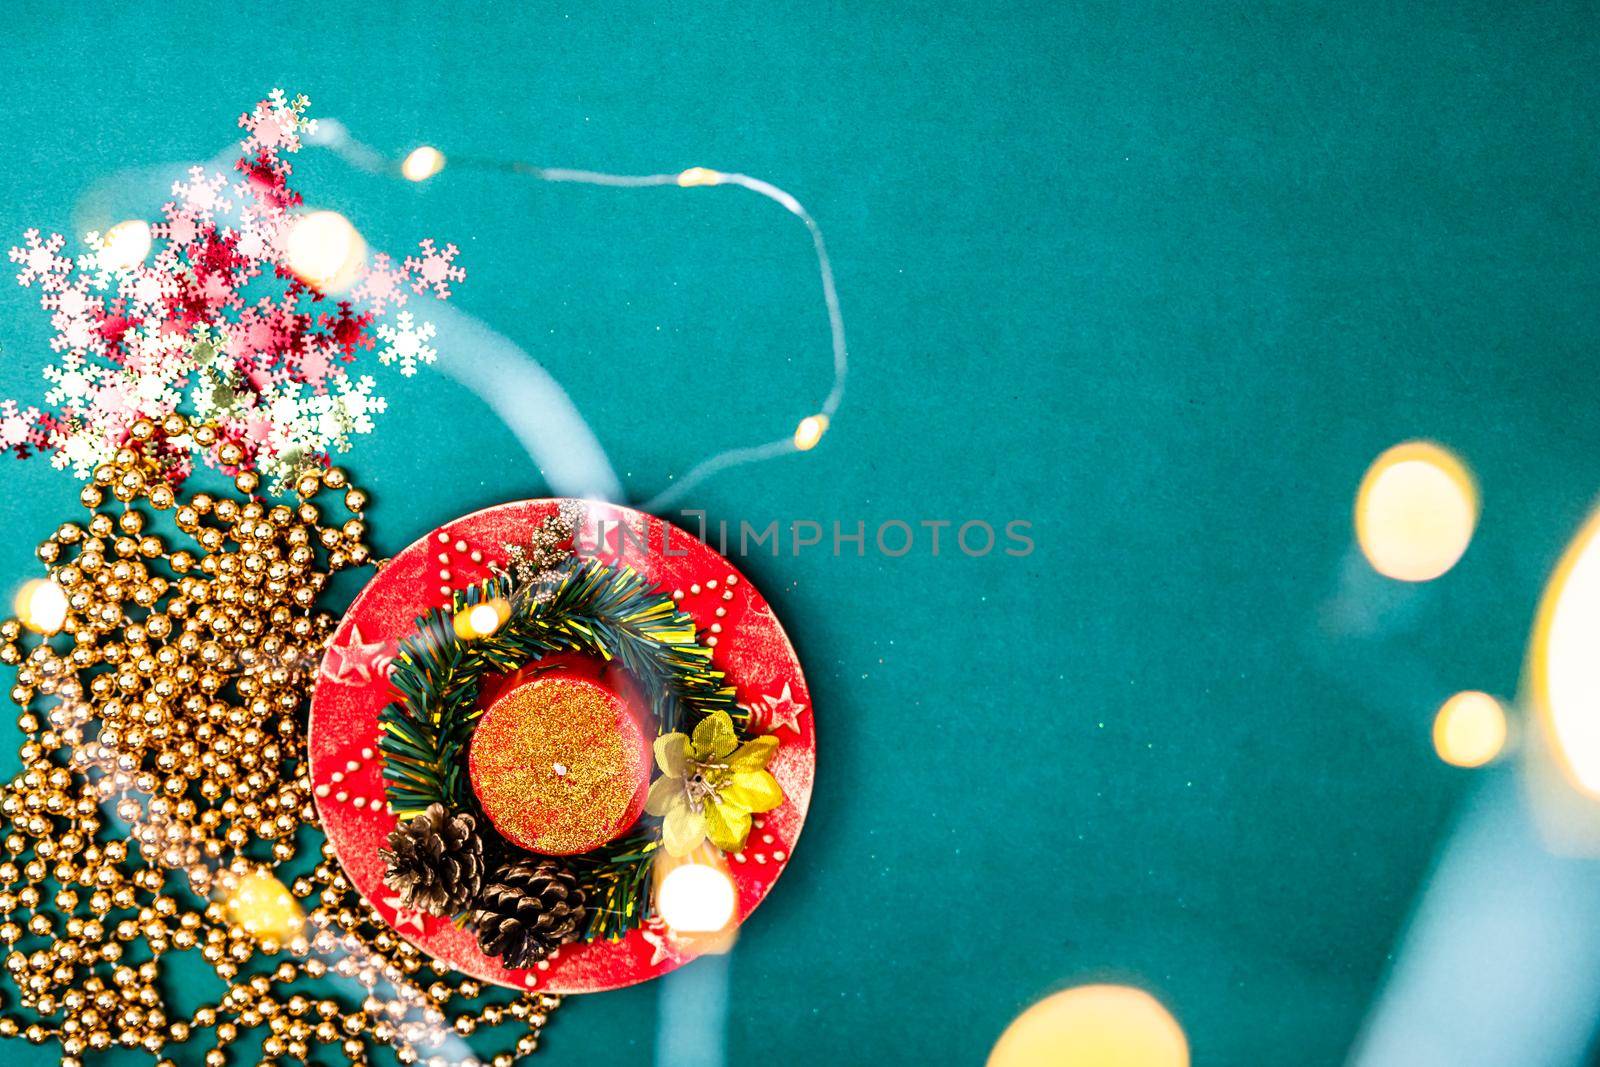 Christmas lights over a december season composition with ornaments and decorations. Top view with copy space on green background.